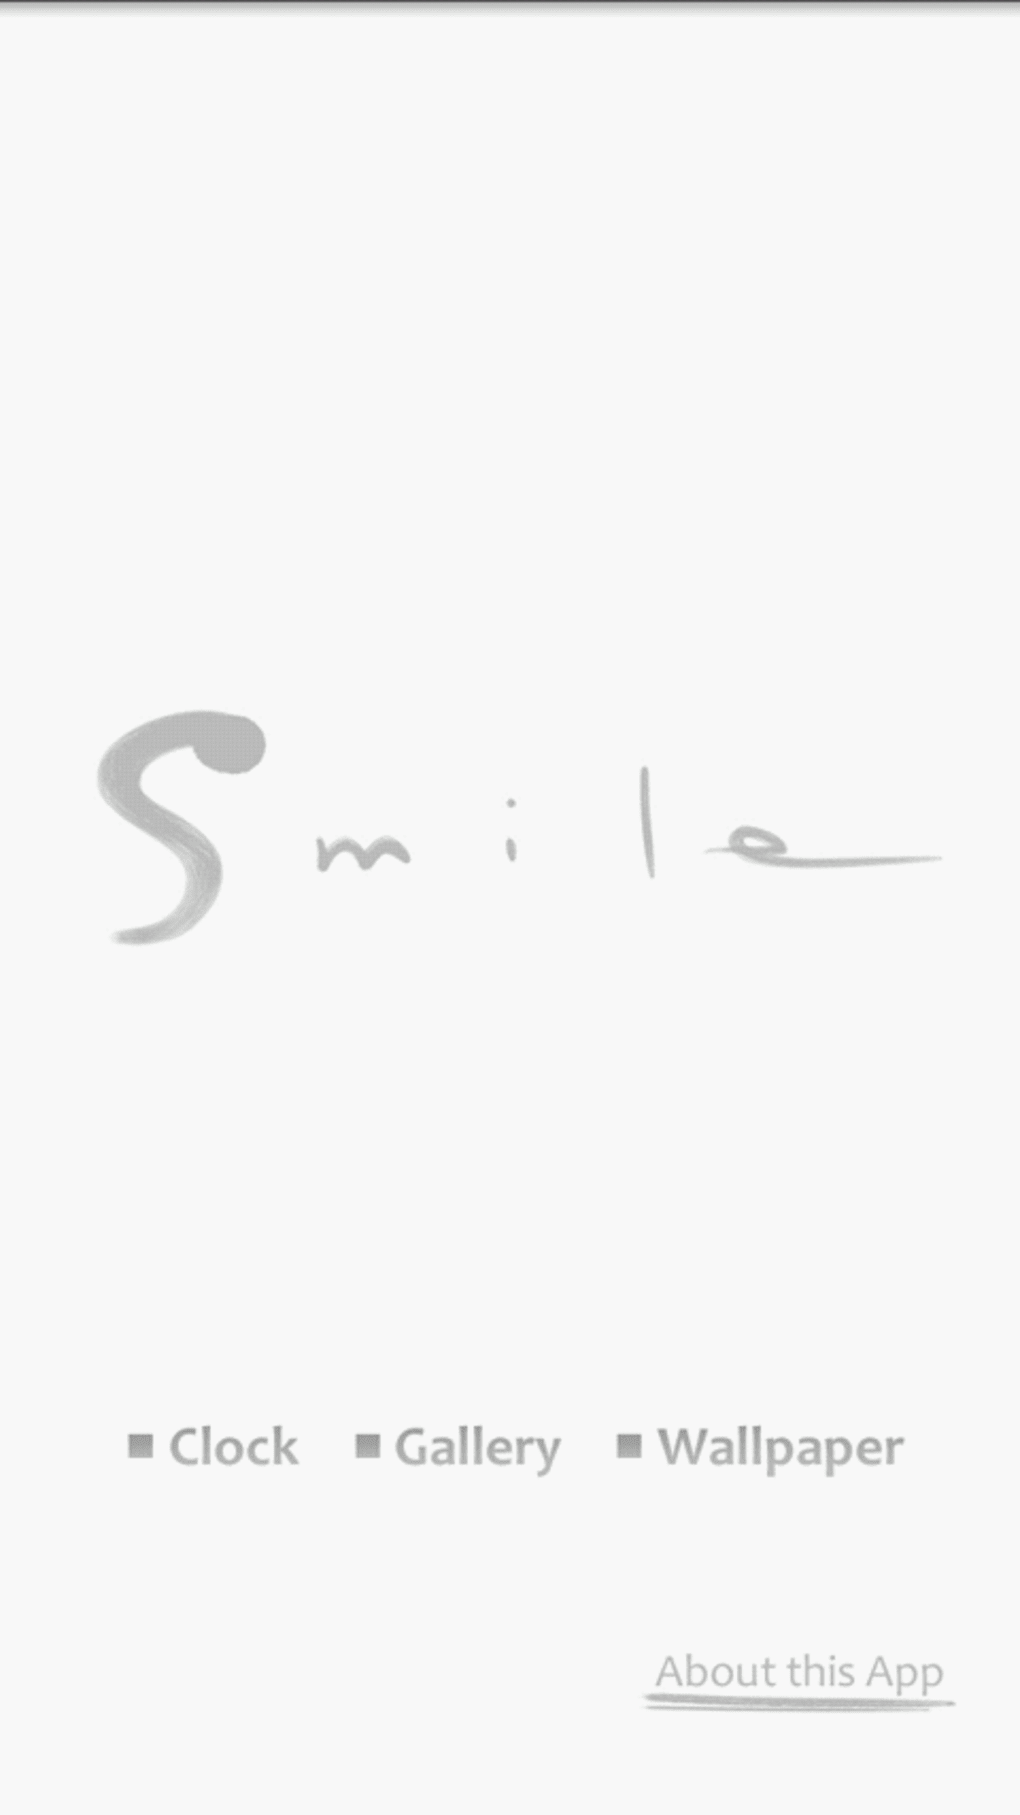 Smile By Inoue Takehiko For Android 無料 ダウンロード